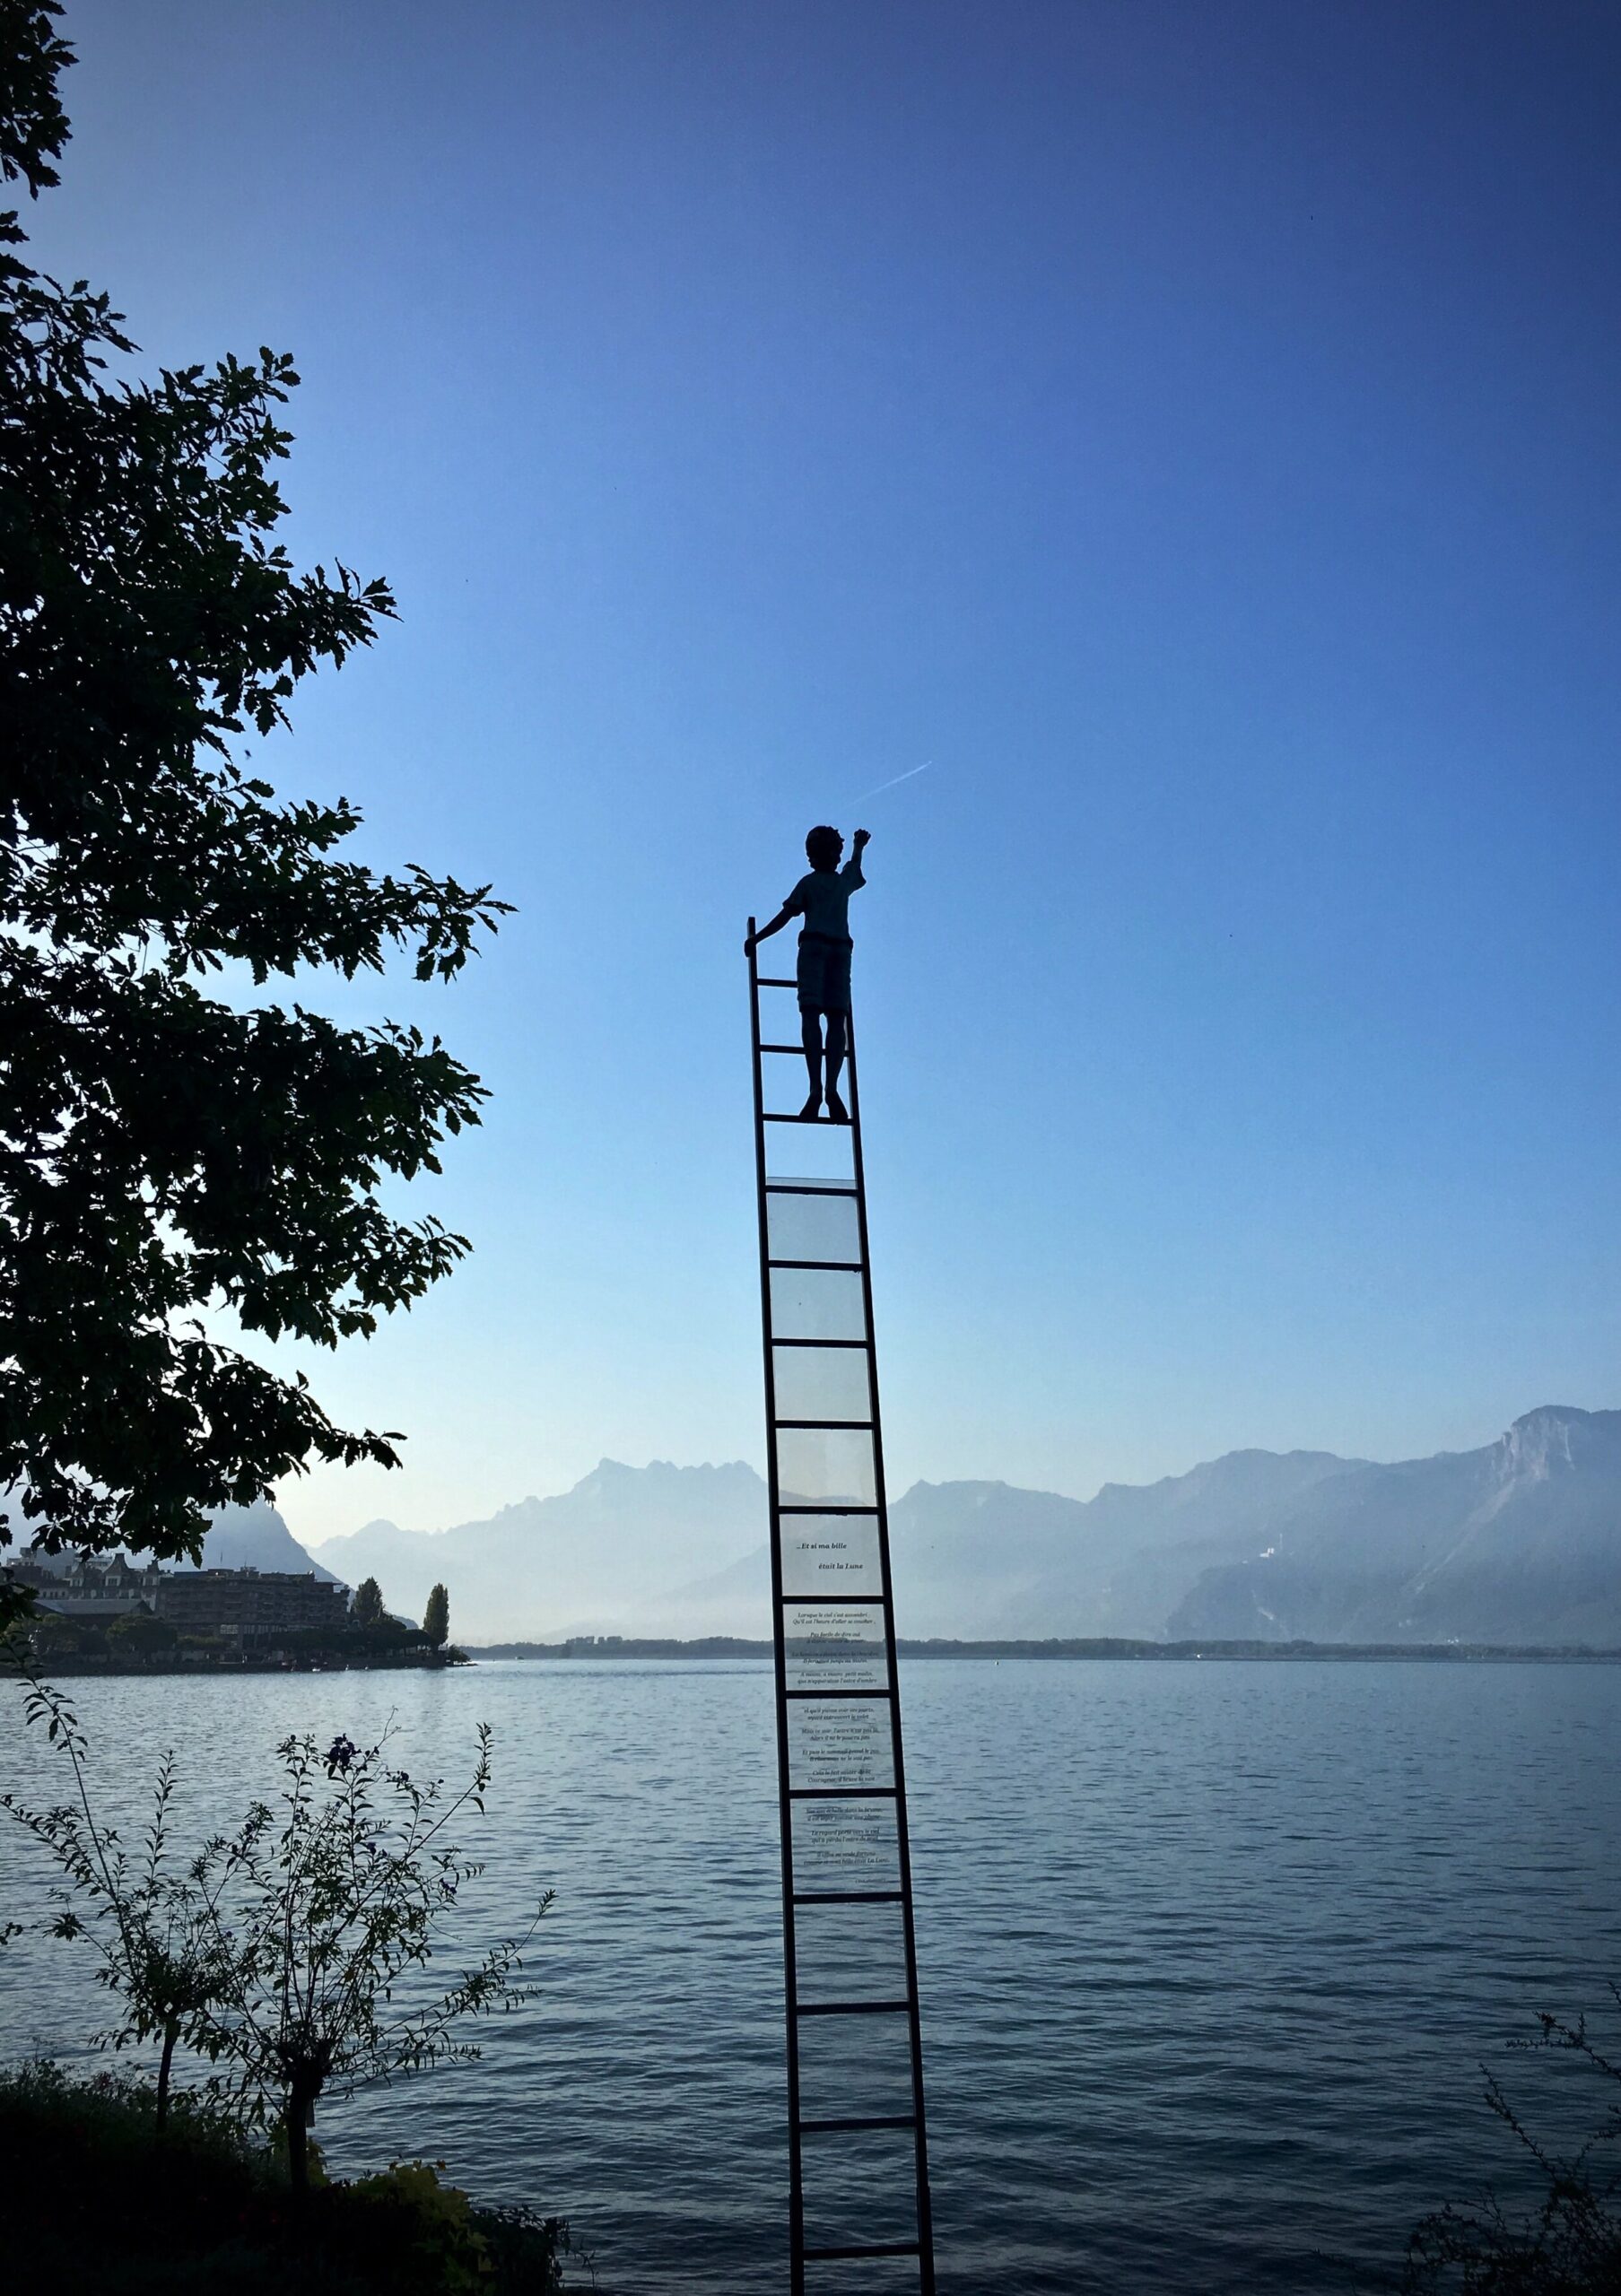 The Benefits of Higher Social Status: Climbing the Social Ladder